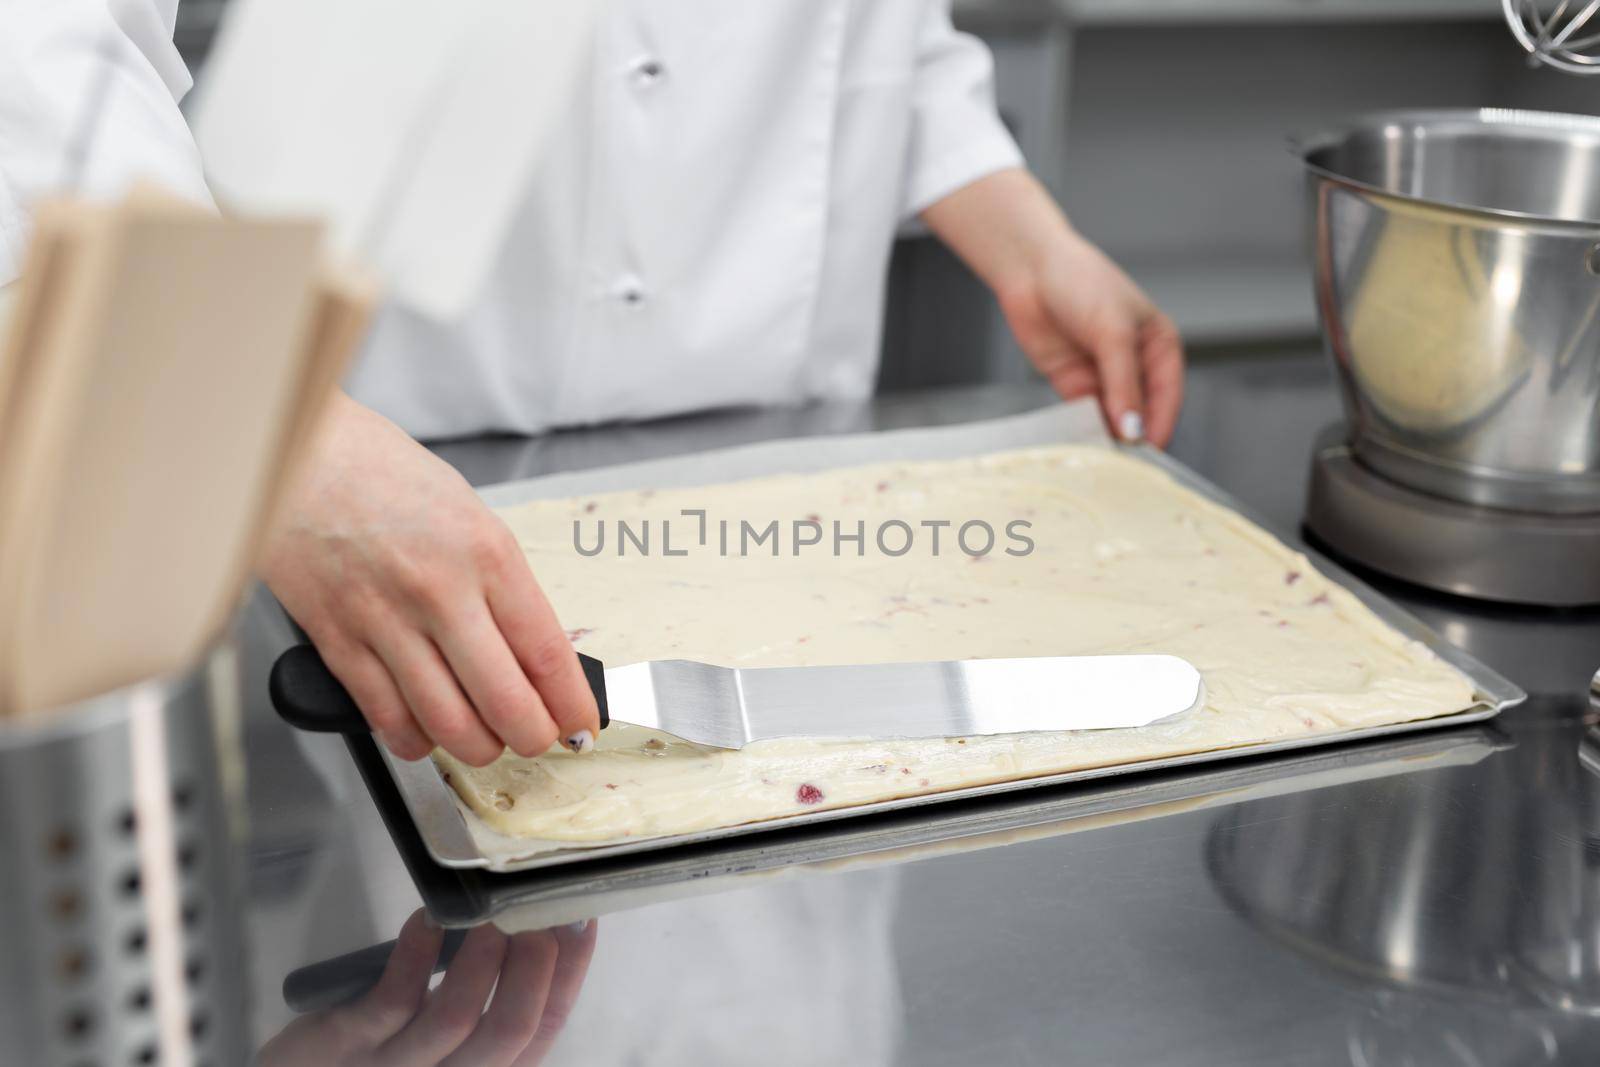 Pastry chef levels the biscuit on parchment before baking by StudioPeace